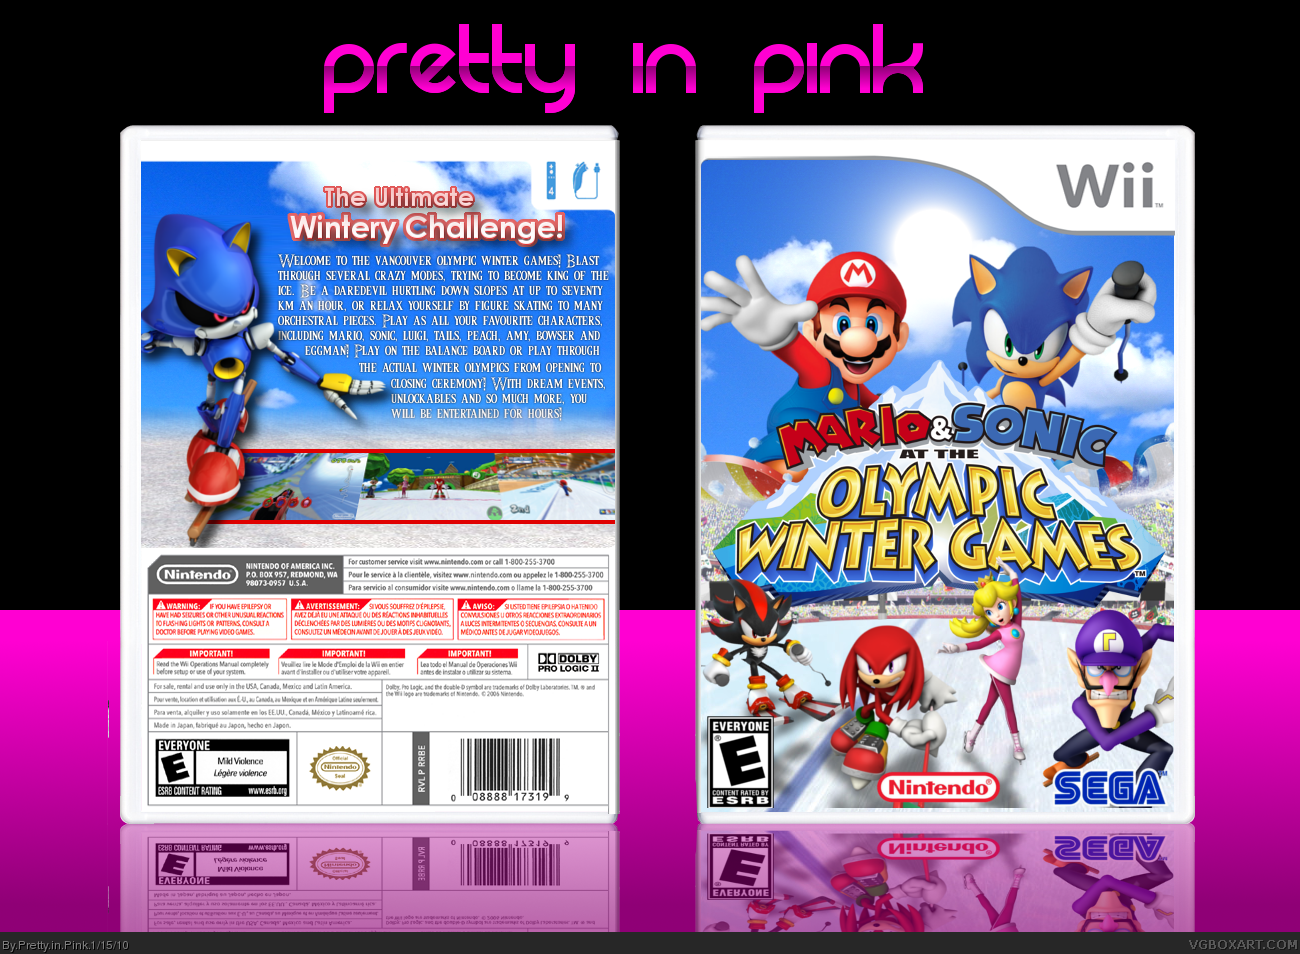 Mario and Sonic at the Olympic Winter Games box cover